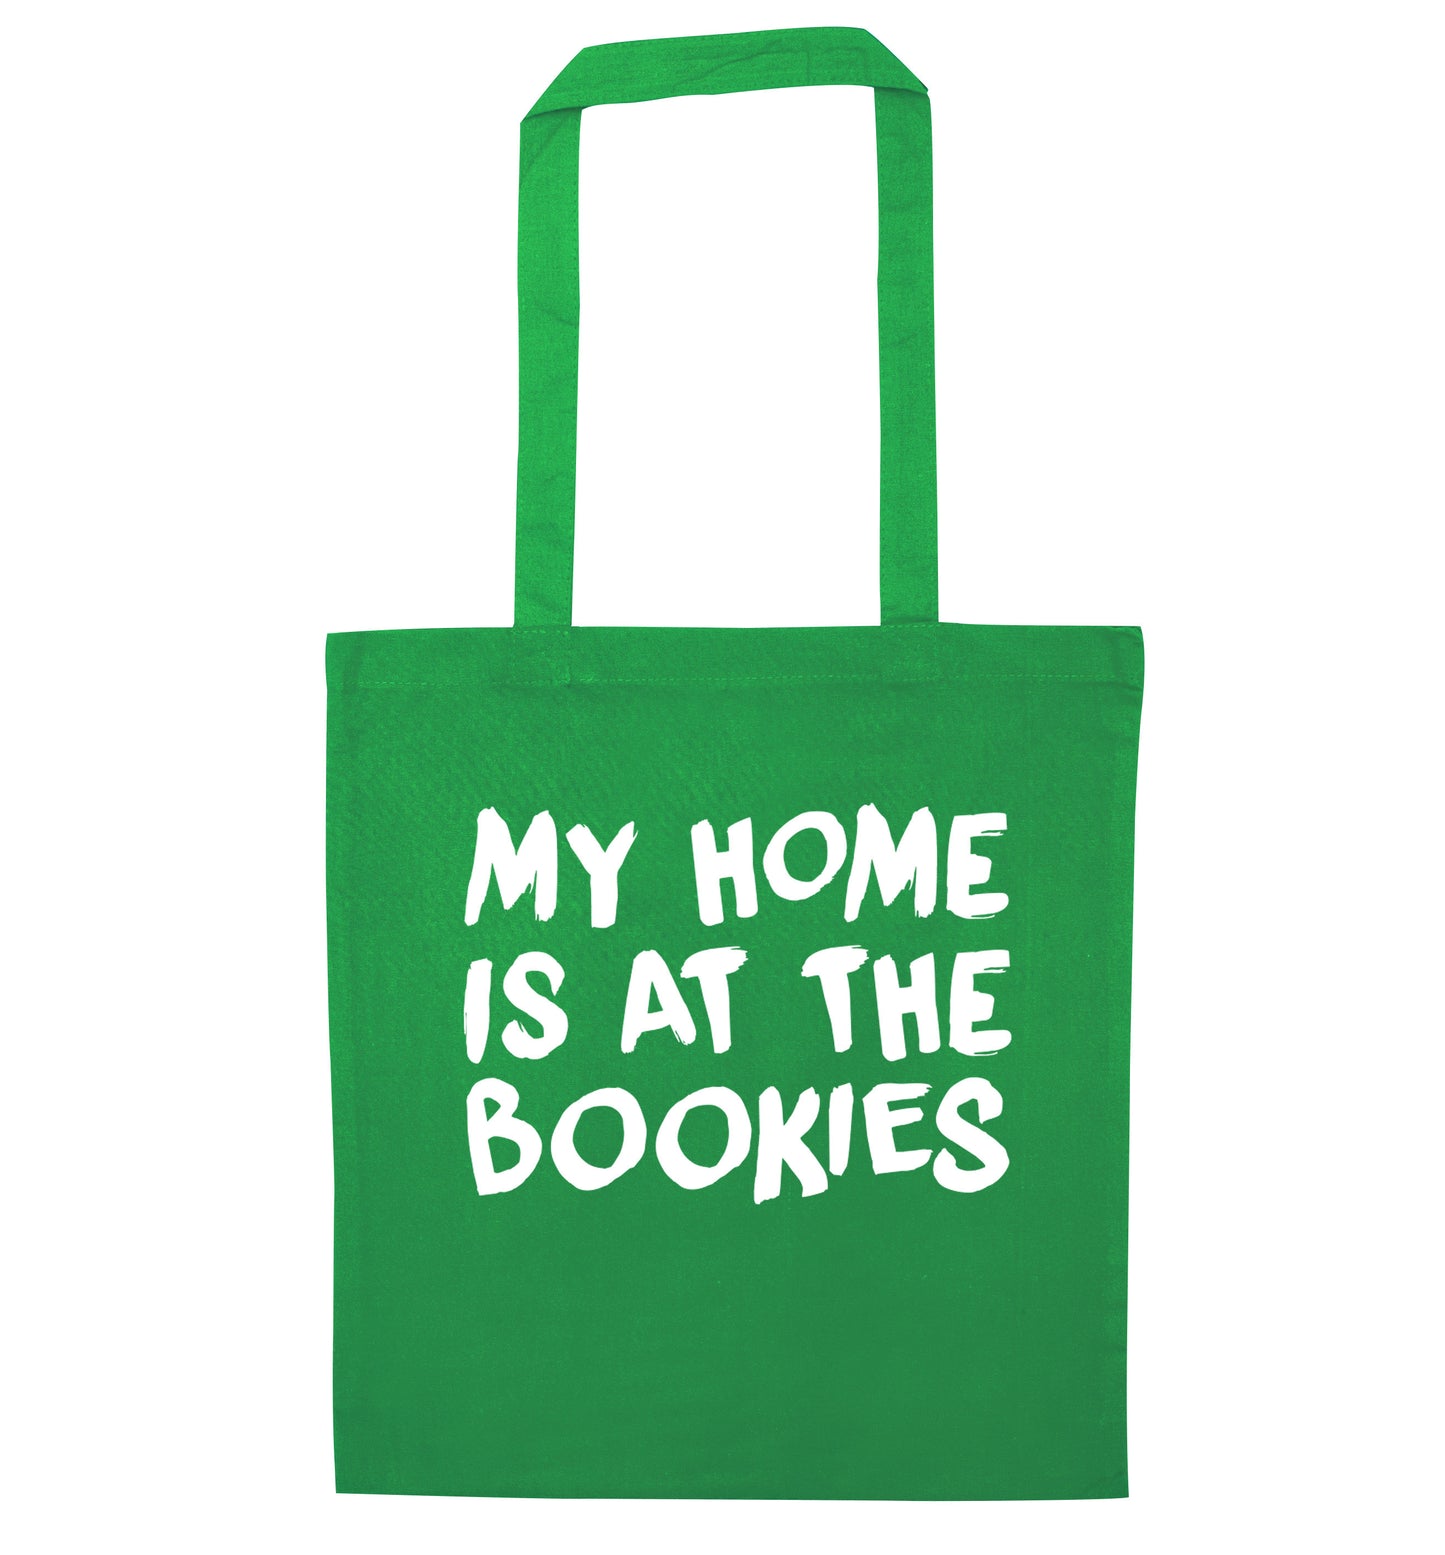 My home is at the bookies green tote bag